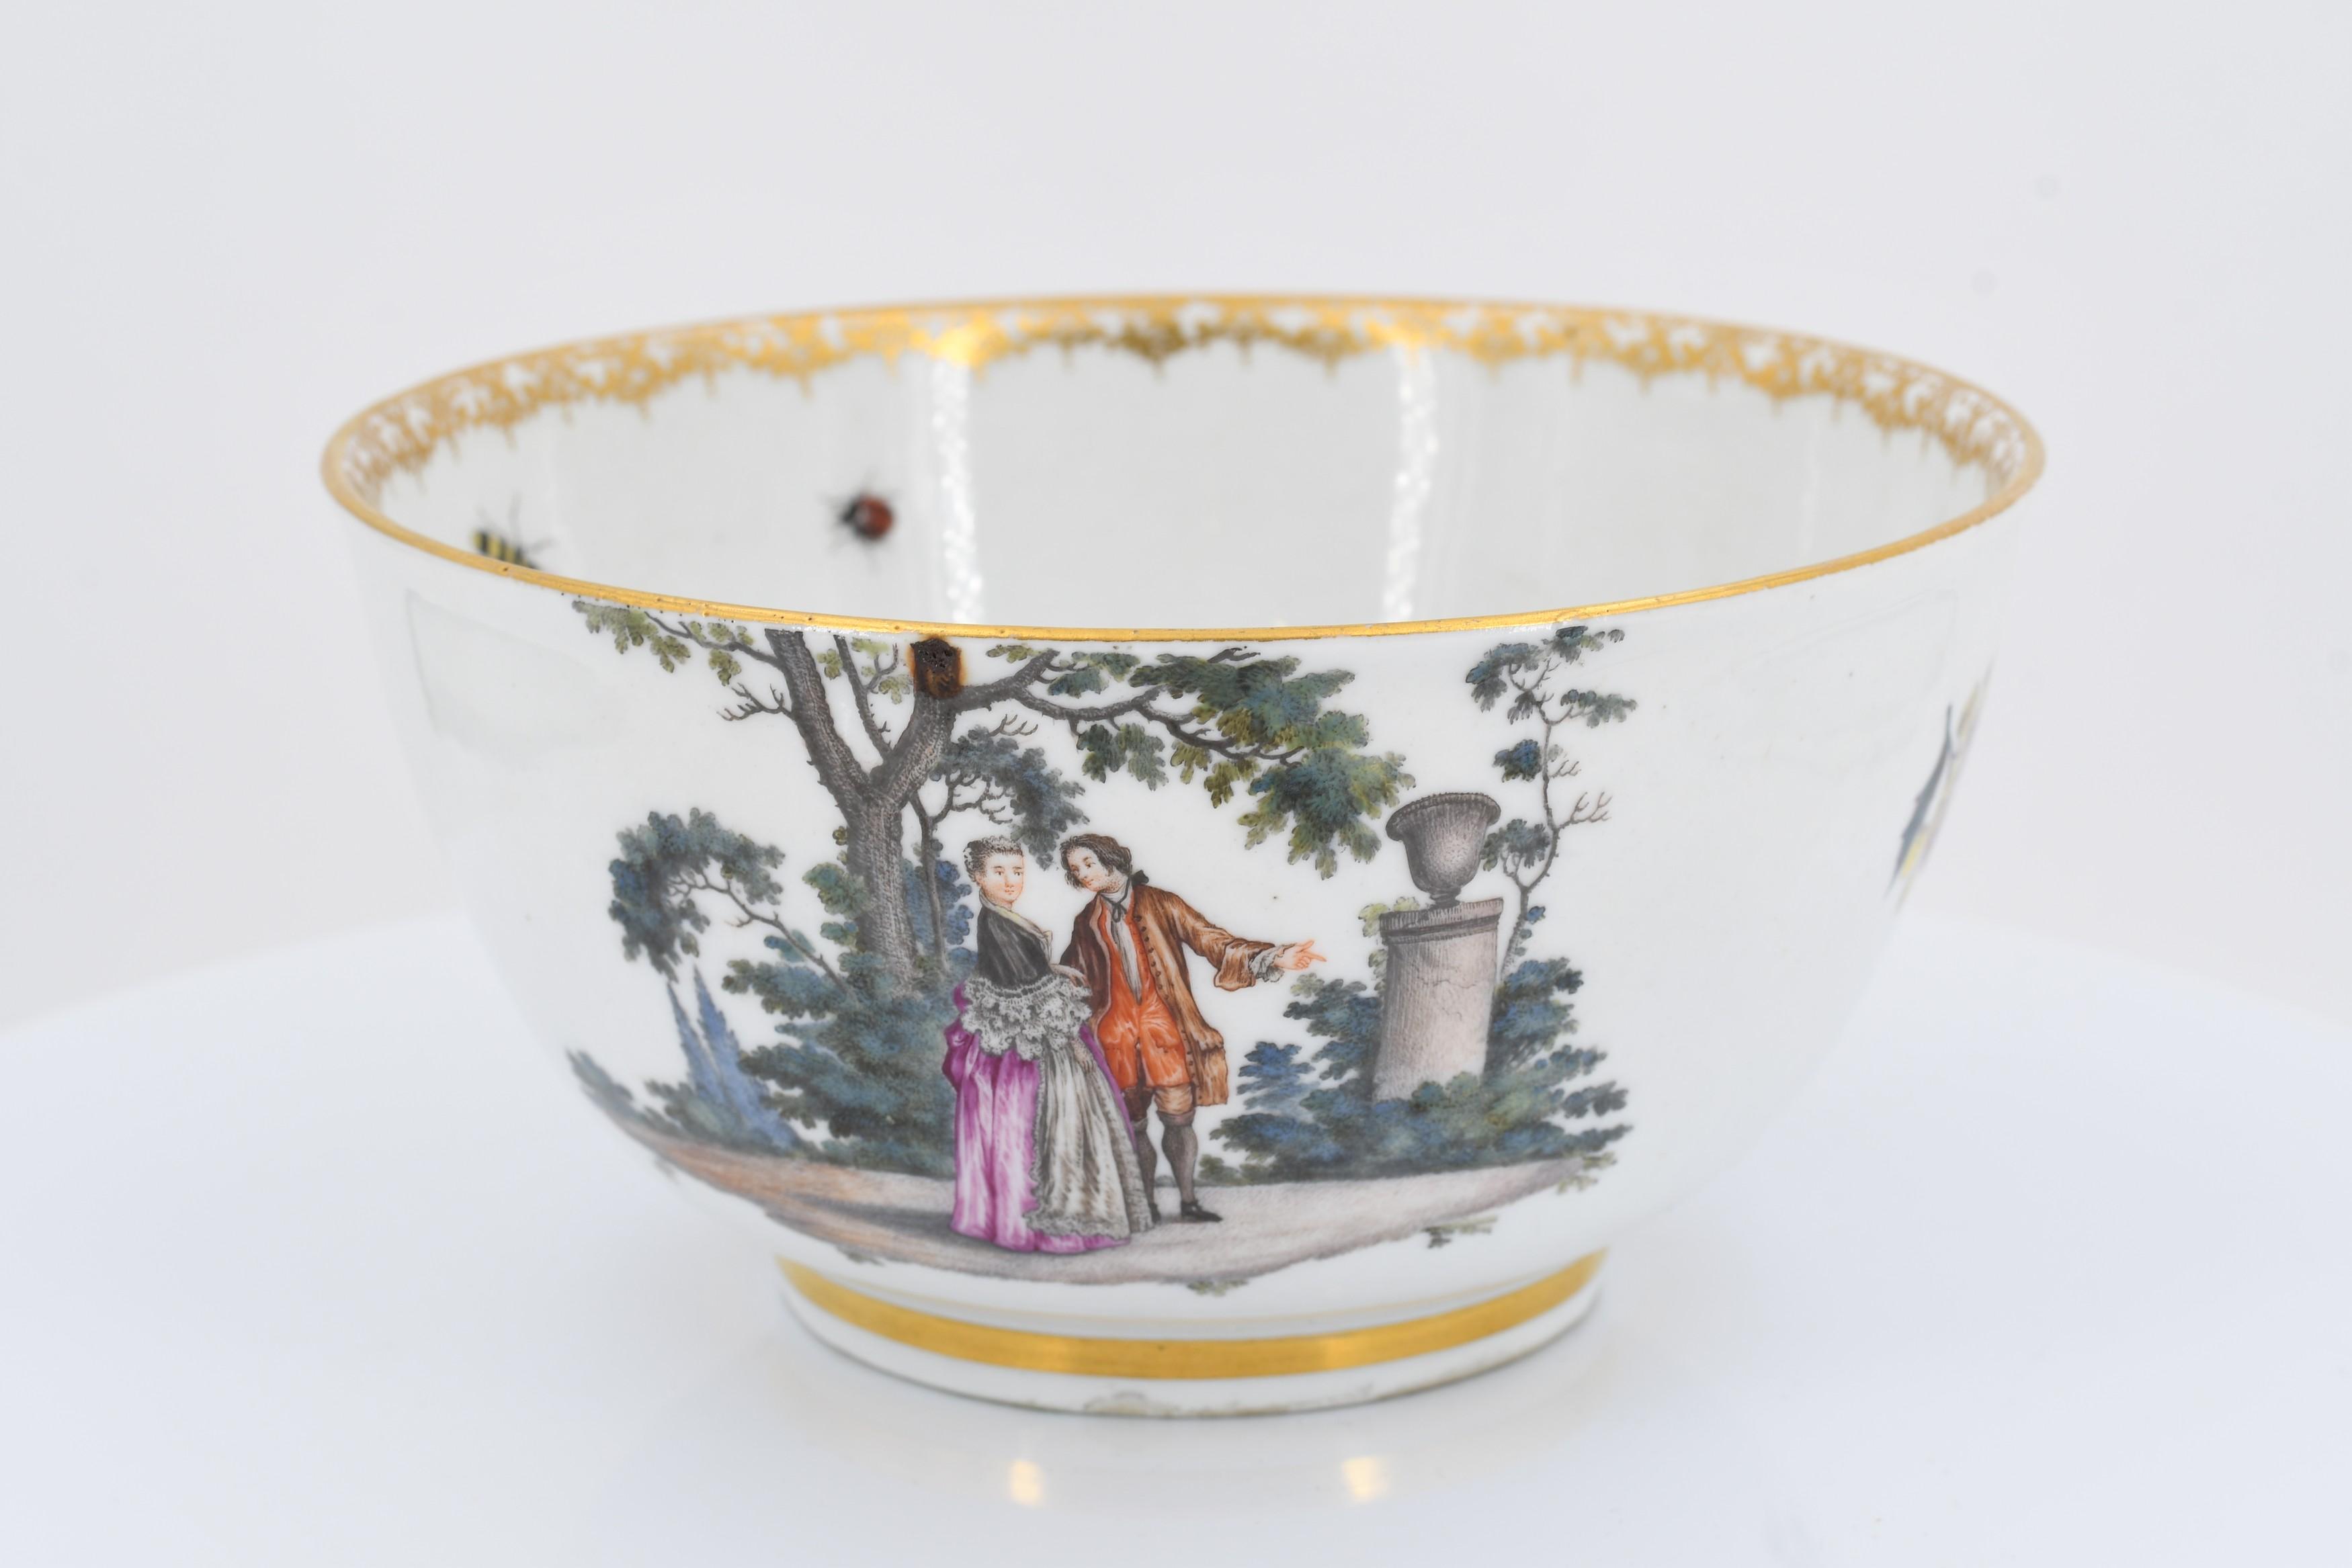 Bowl with Watteau scenes - Image 2 of 7